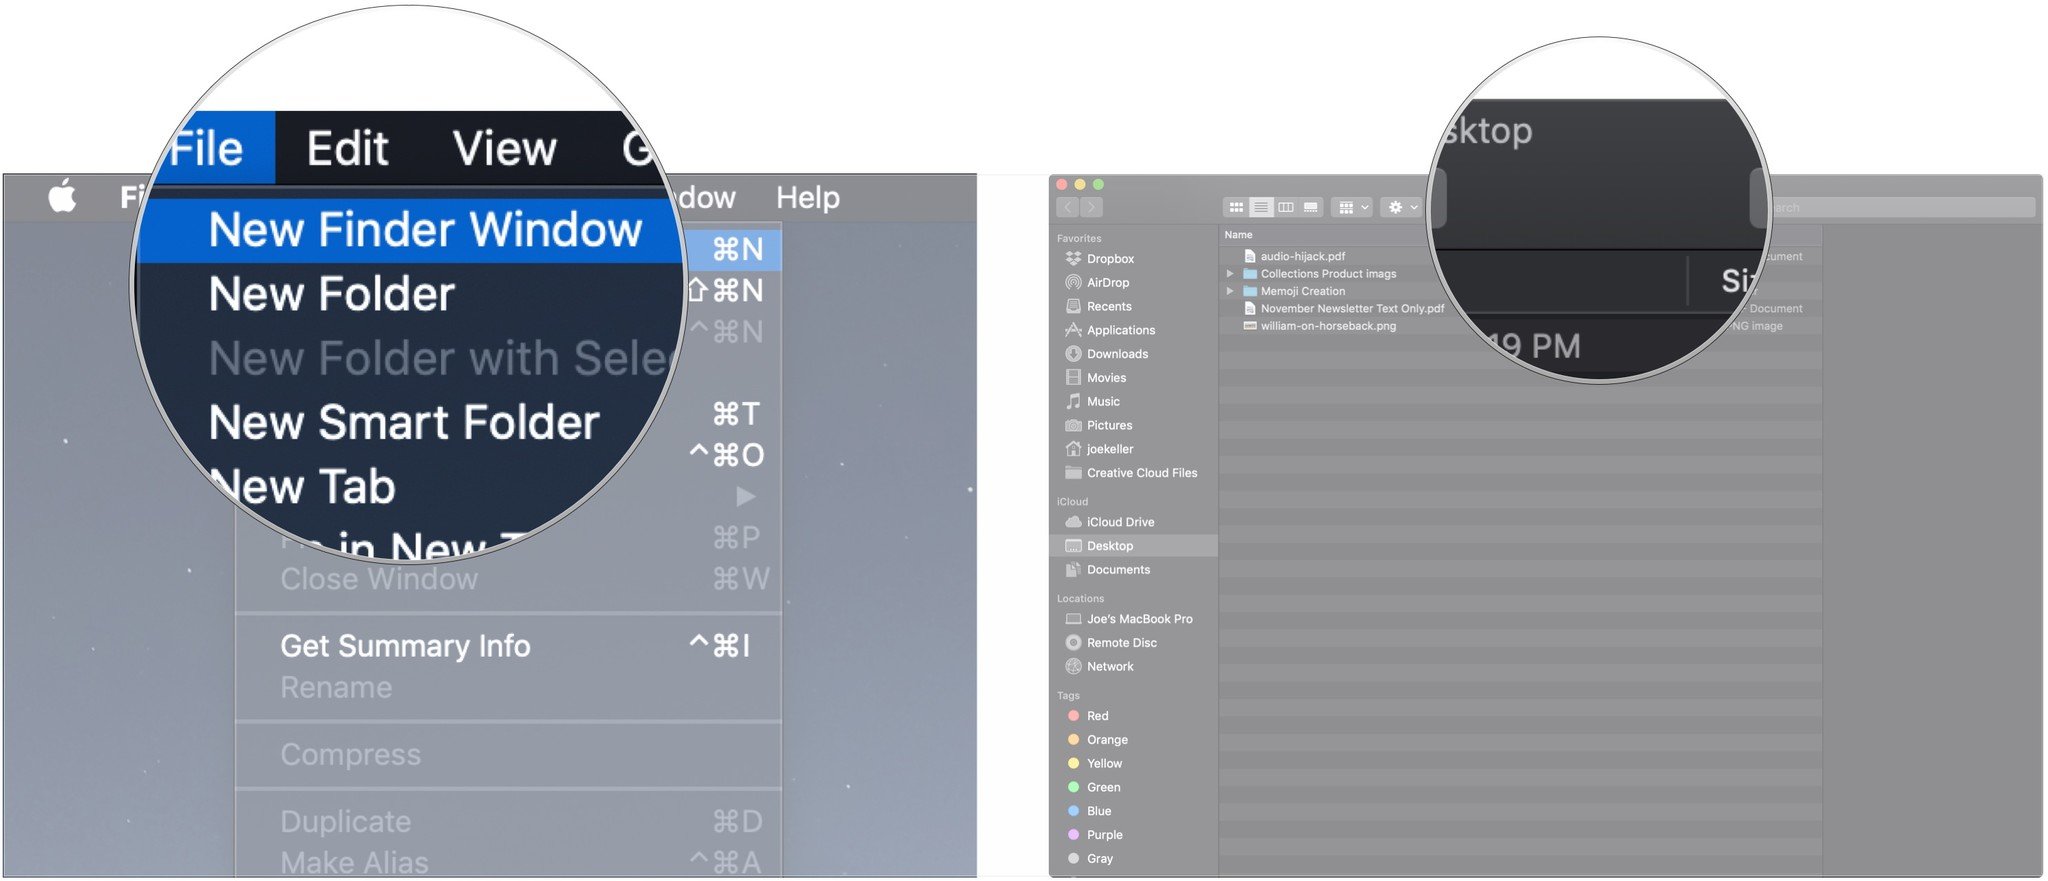 To customize the Finder toolbar, open Finder window, right-click toolbar